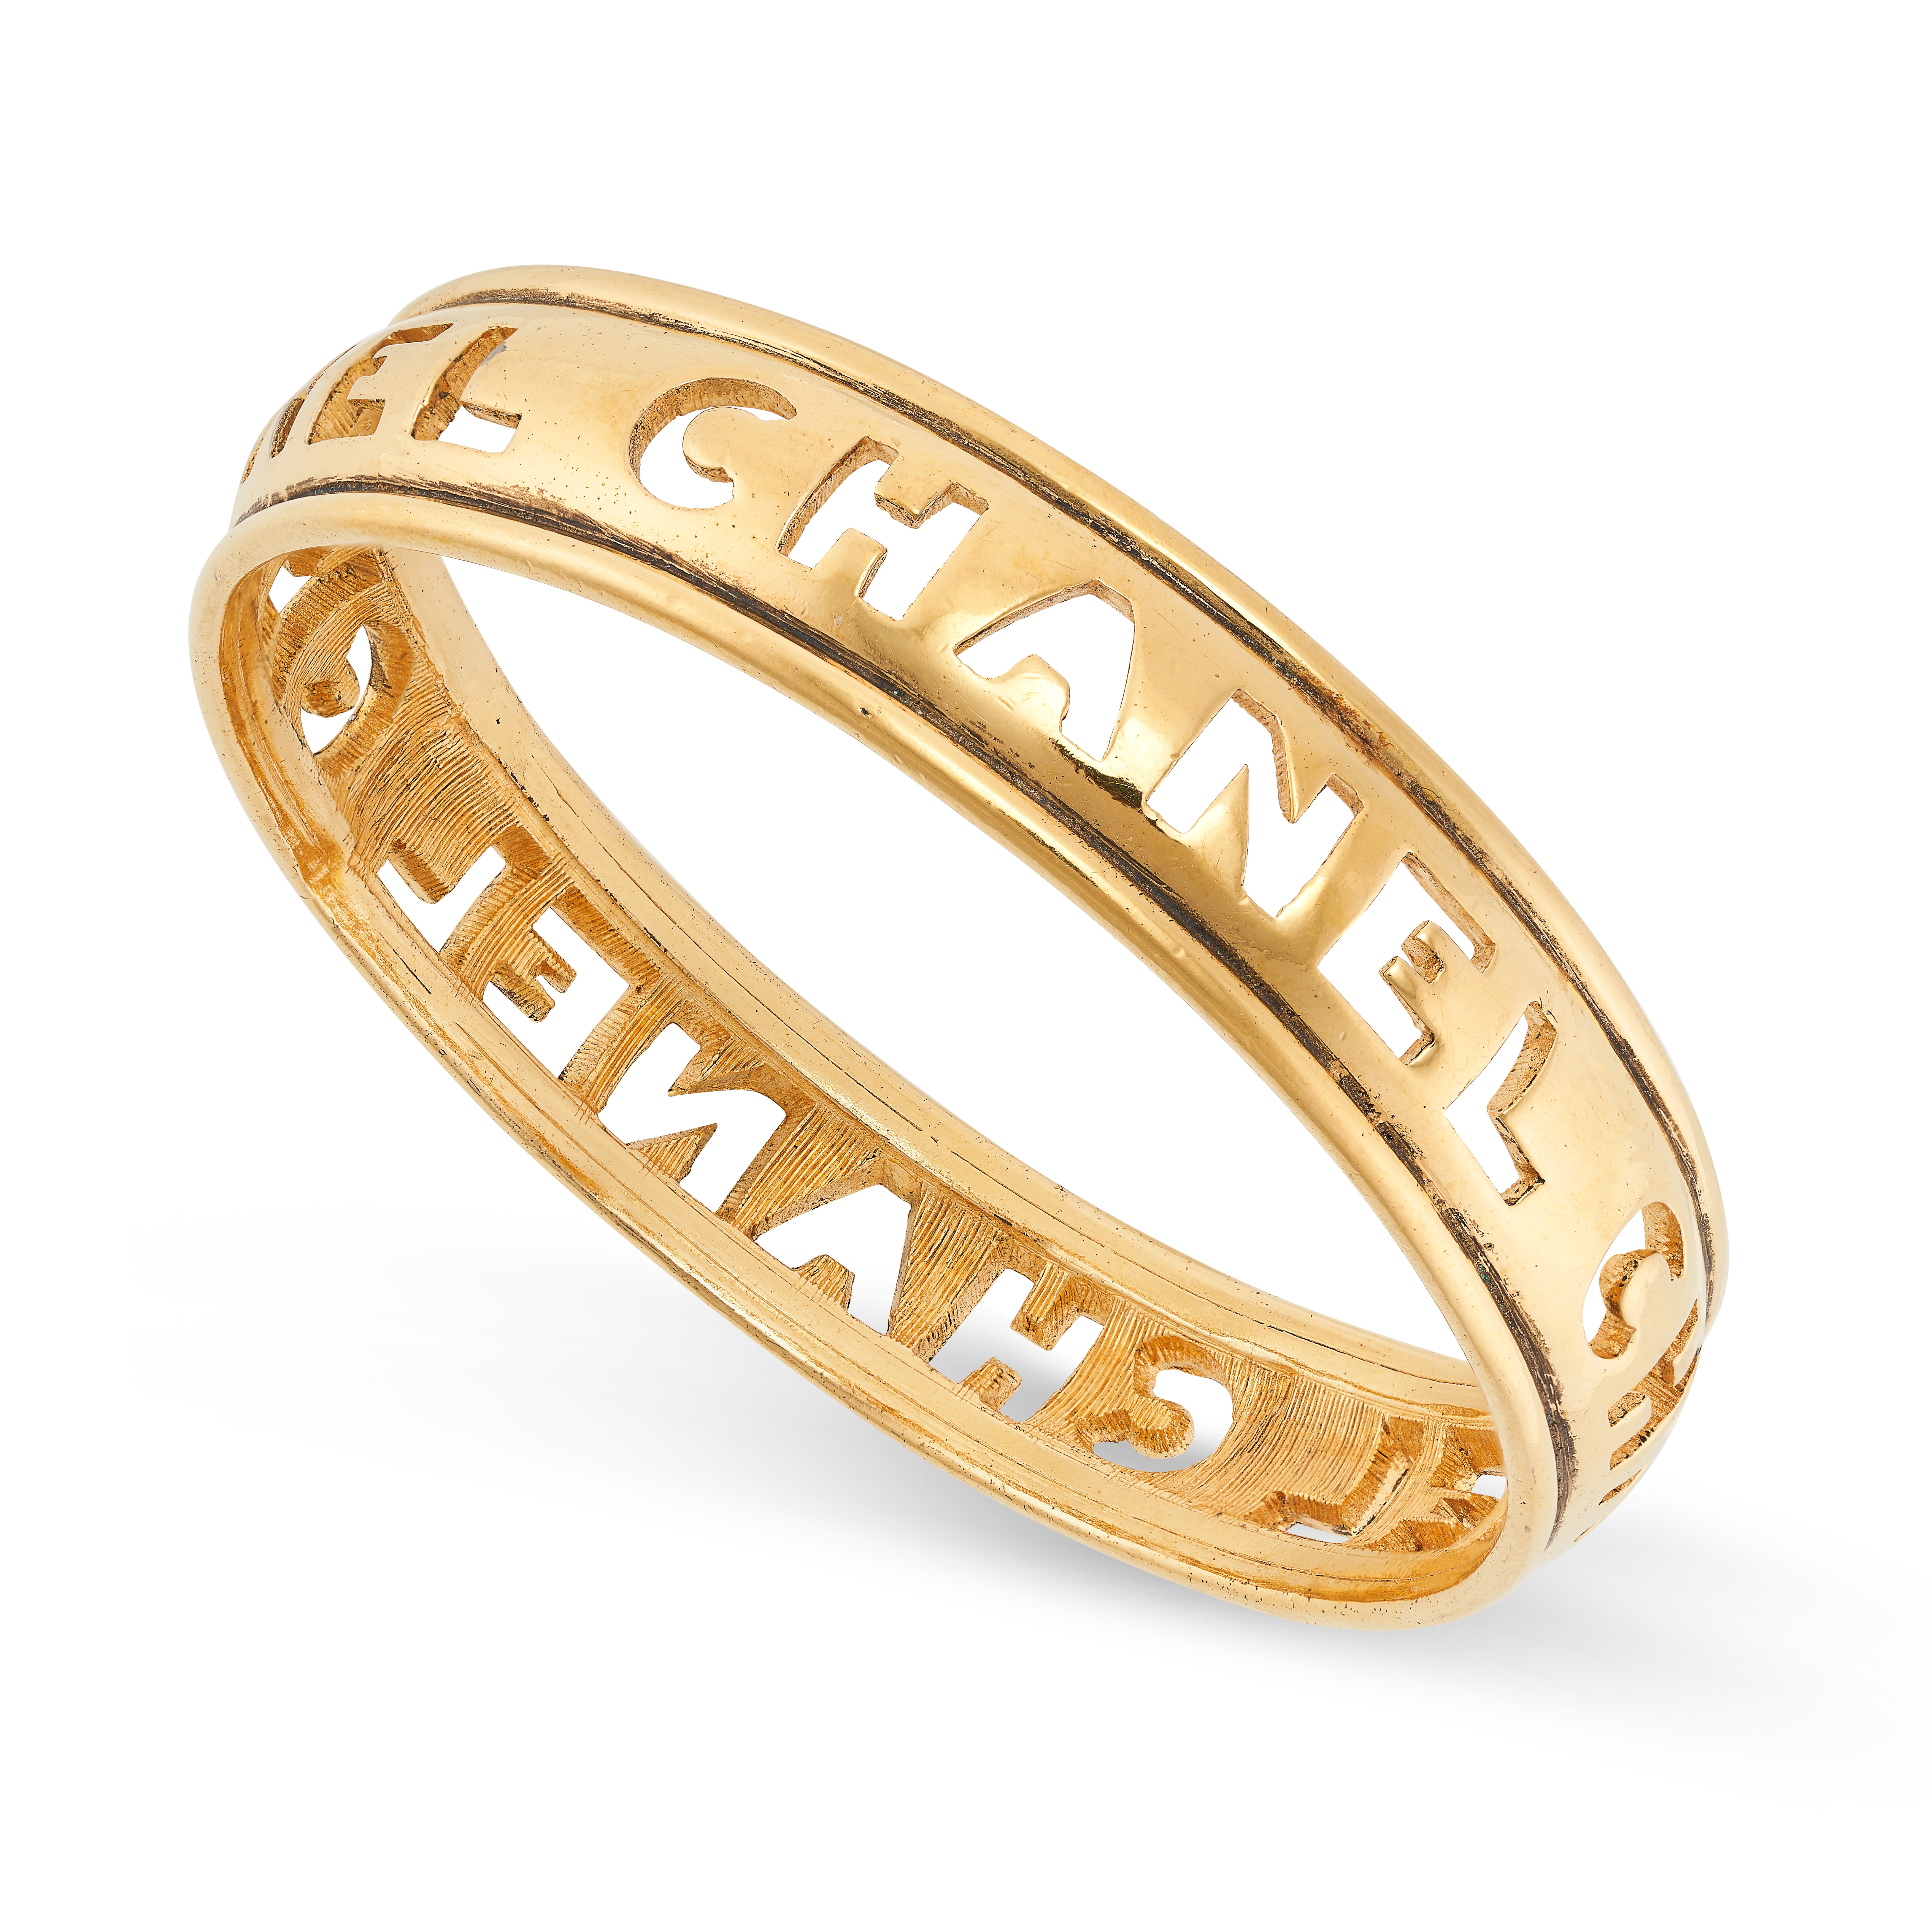 CHANEL, A VINTAGE BANGLE, 1980S featuring CHANEL in cut out design, inner circumference 21.0cm, 42.